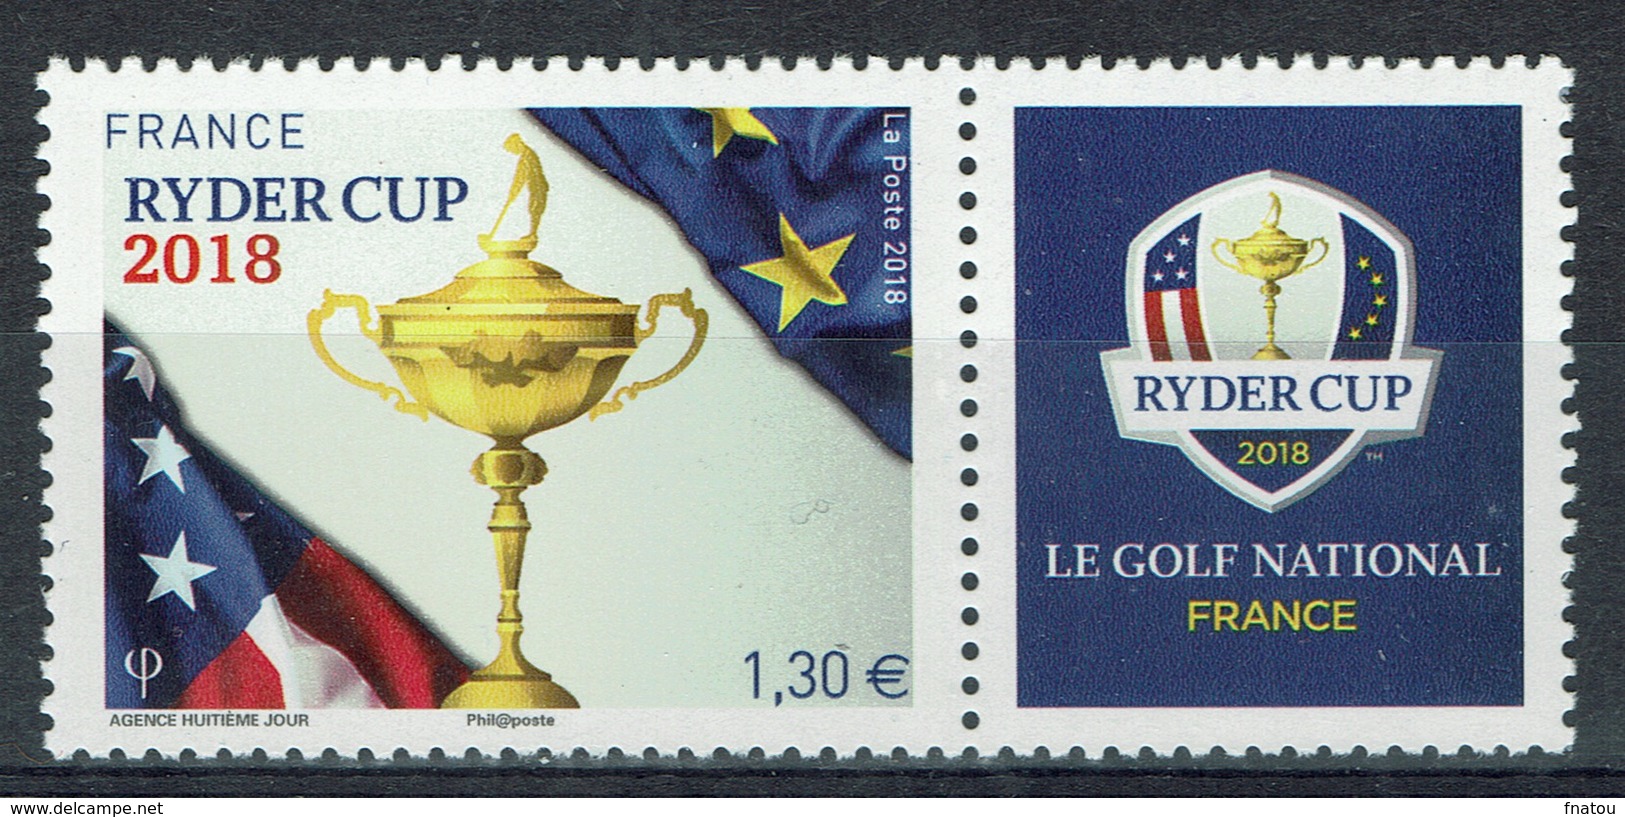 France, Ryder Cup, Golf Competition, 2018, MNH VF - Unused Stamps